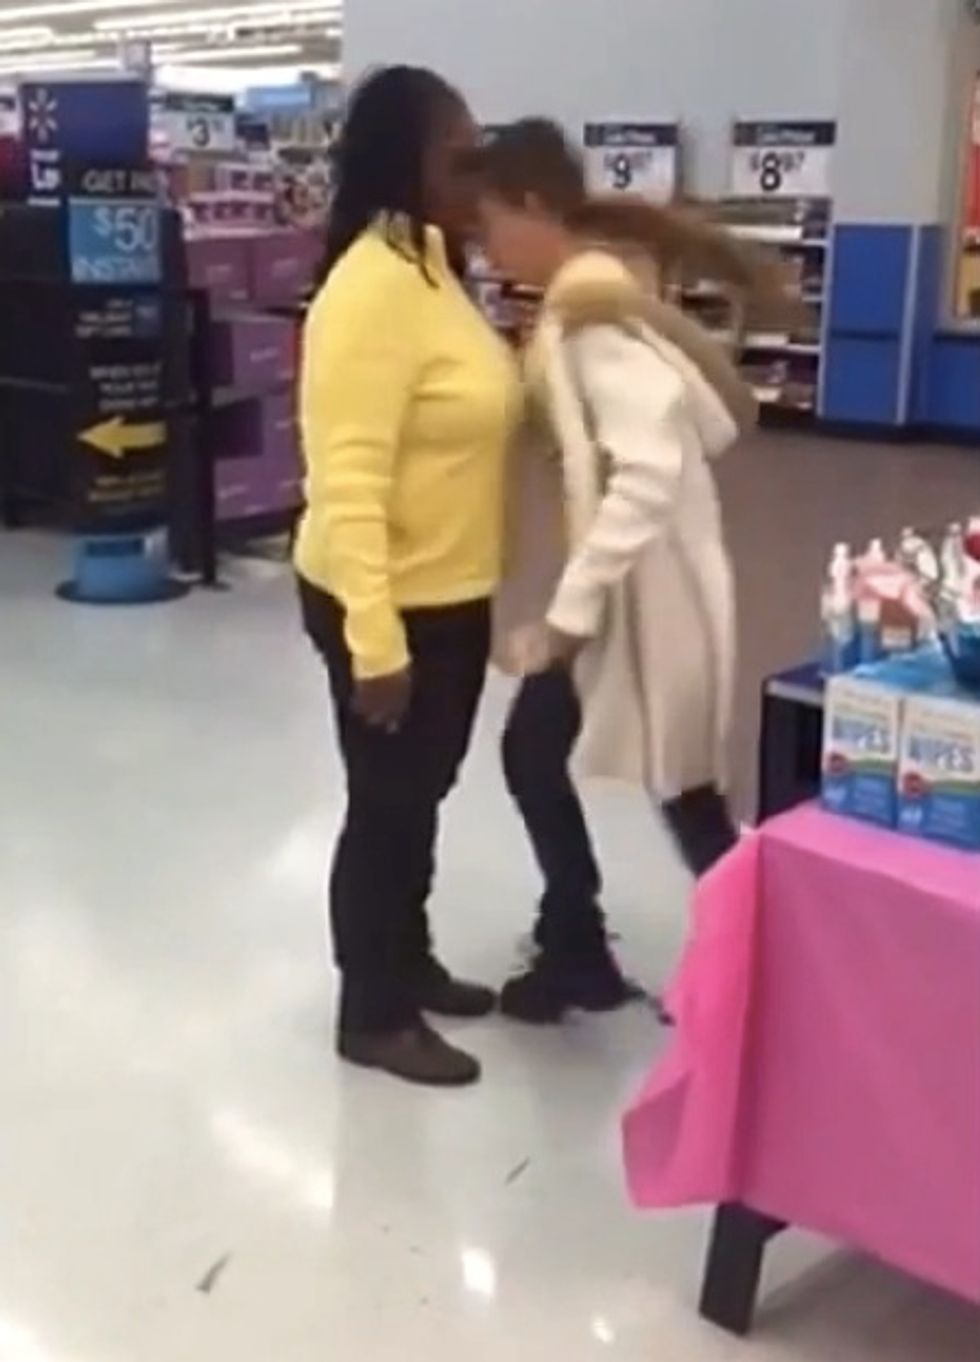 Caught on Video: Unanticipated, Brutal Head-Butt Sparks In-Store Fight Between Employee and Customer